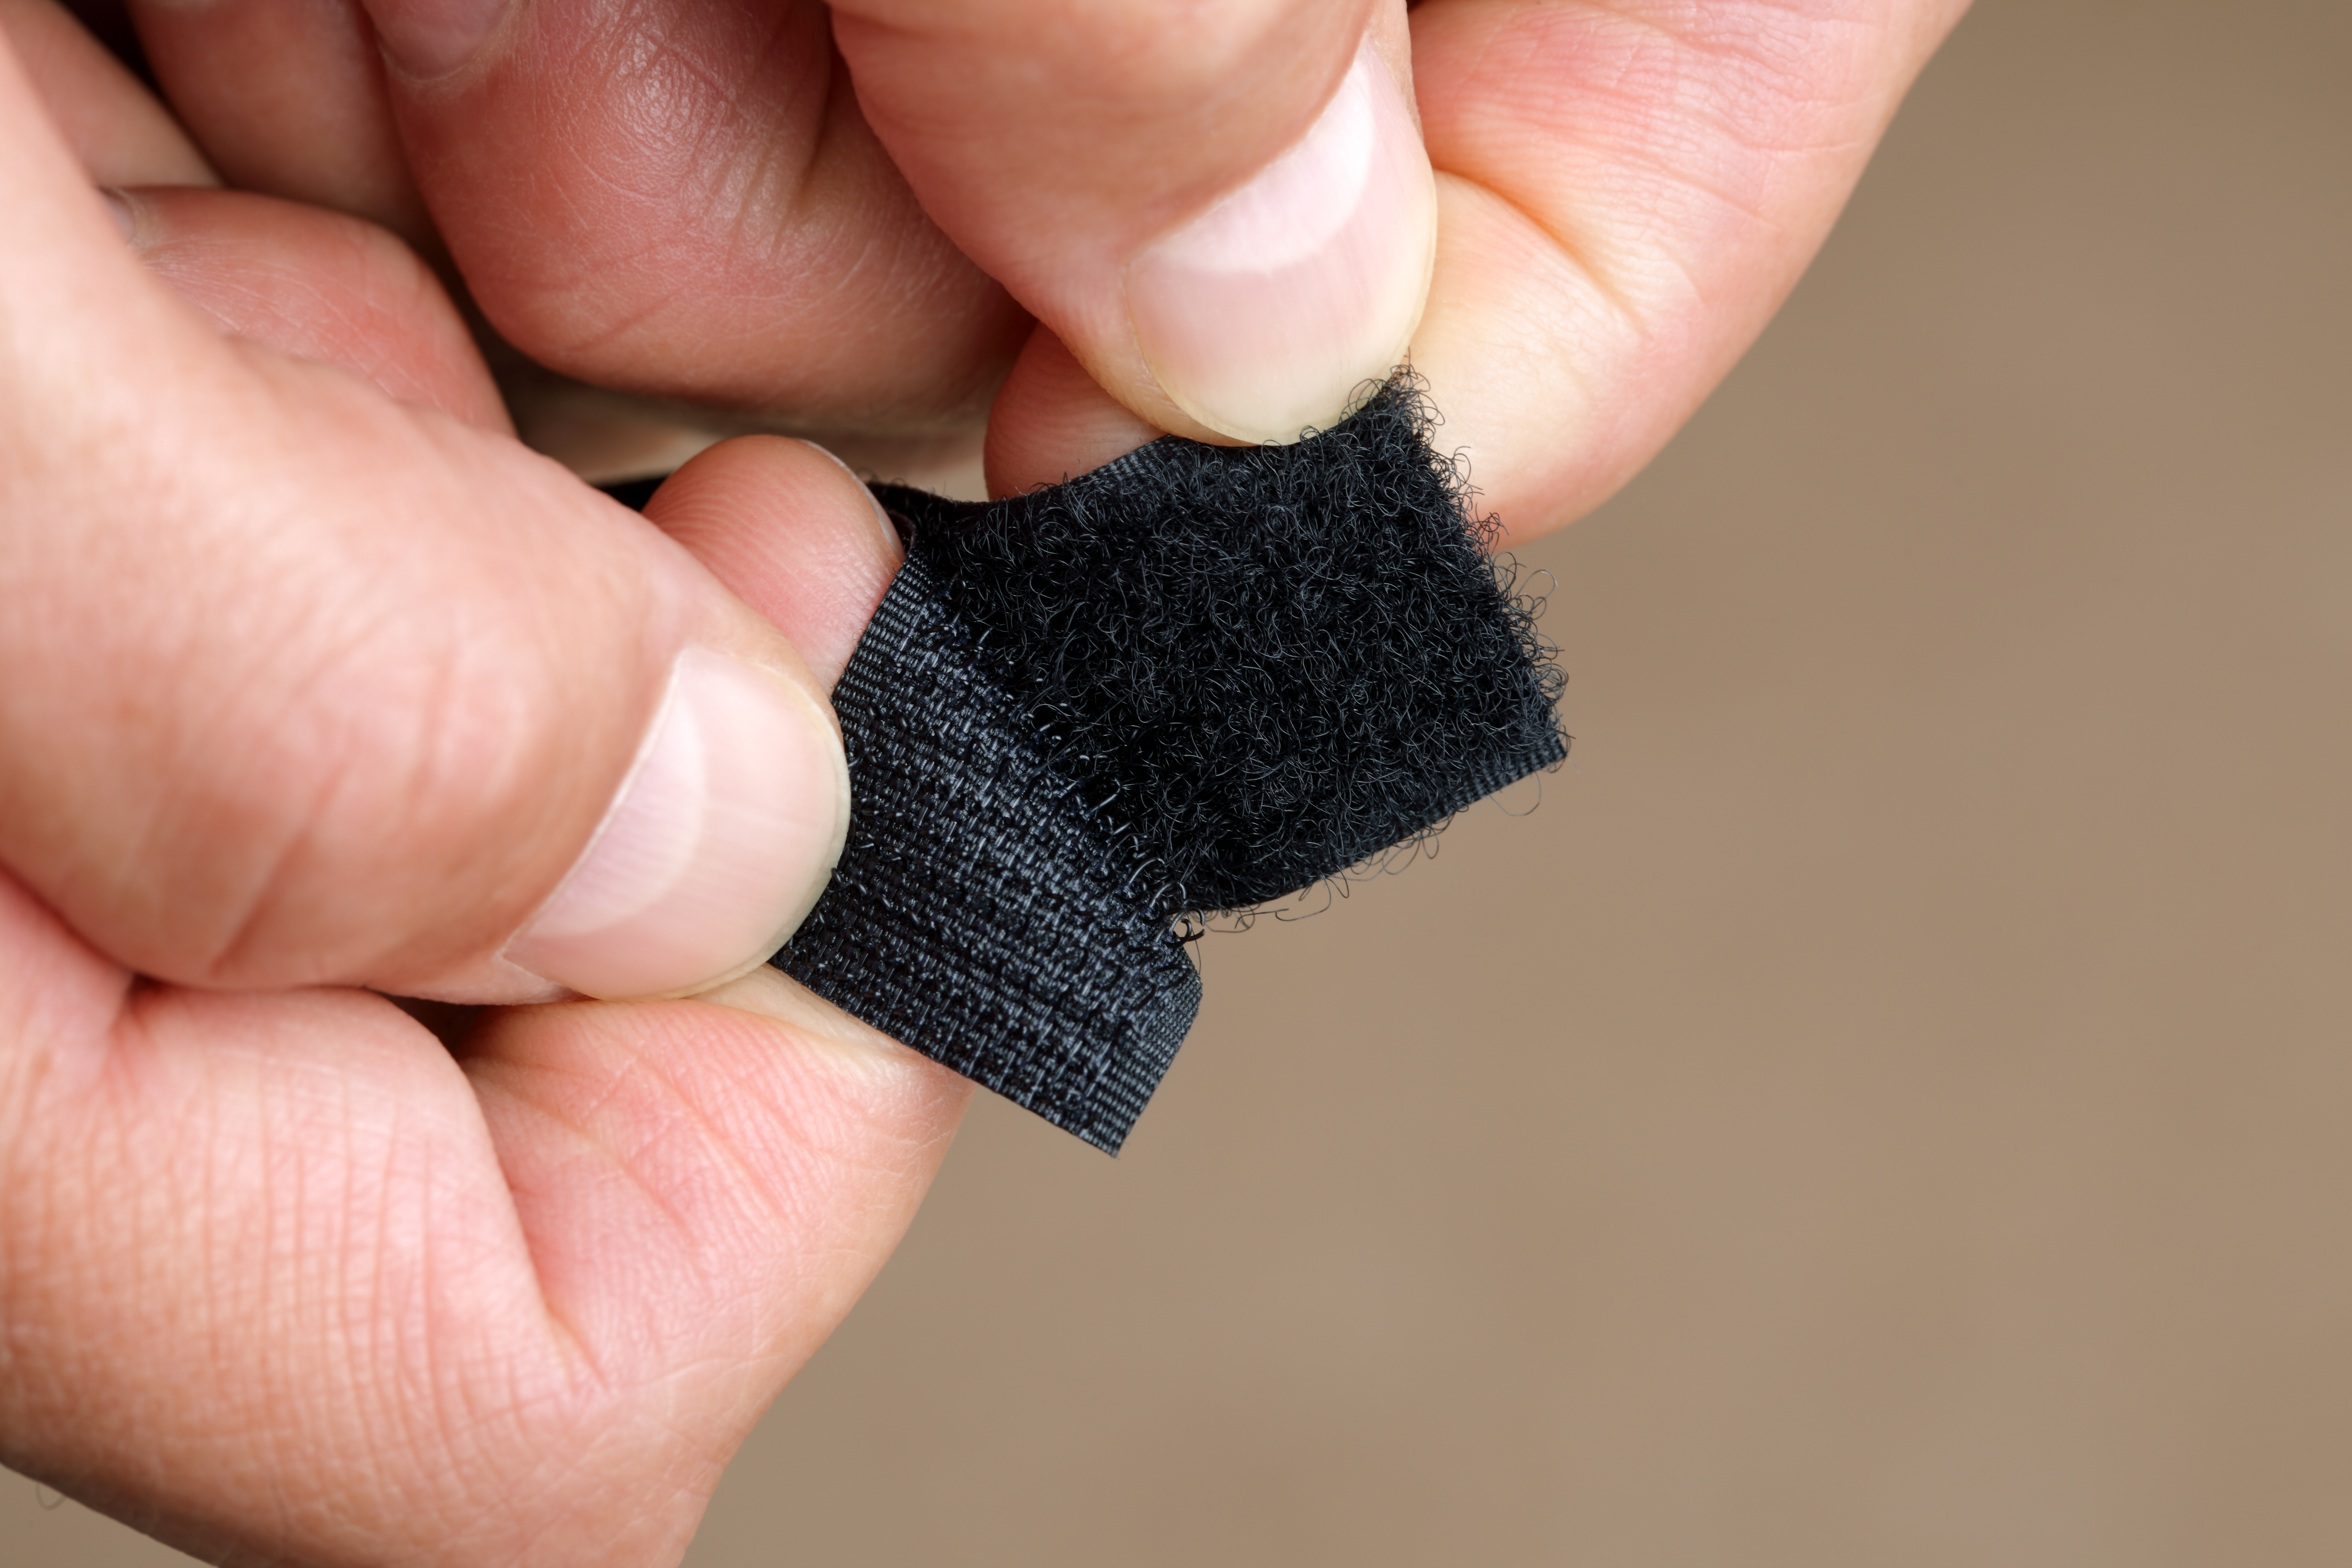 How to Quickly Clean Velcro & Make It Sticky Again